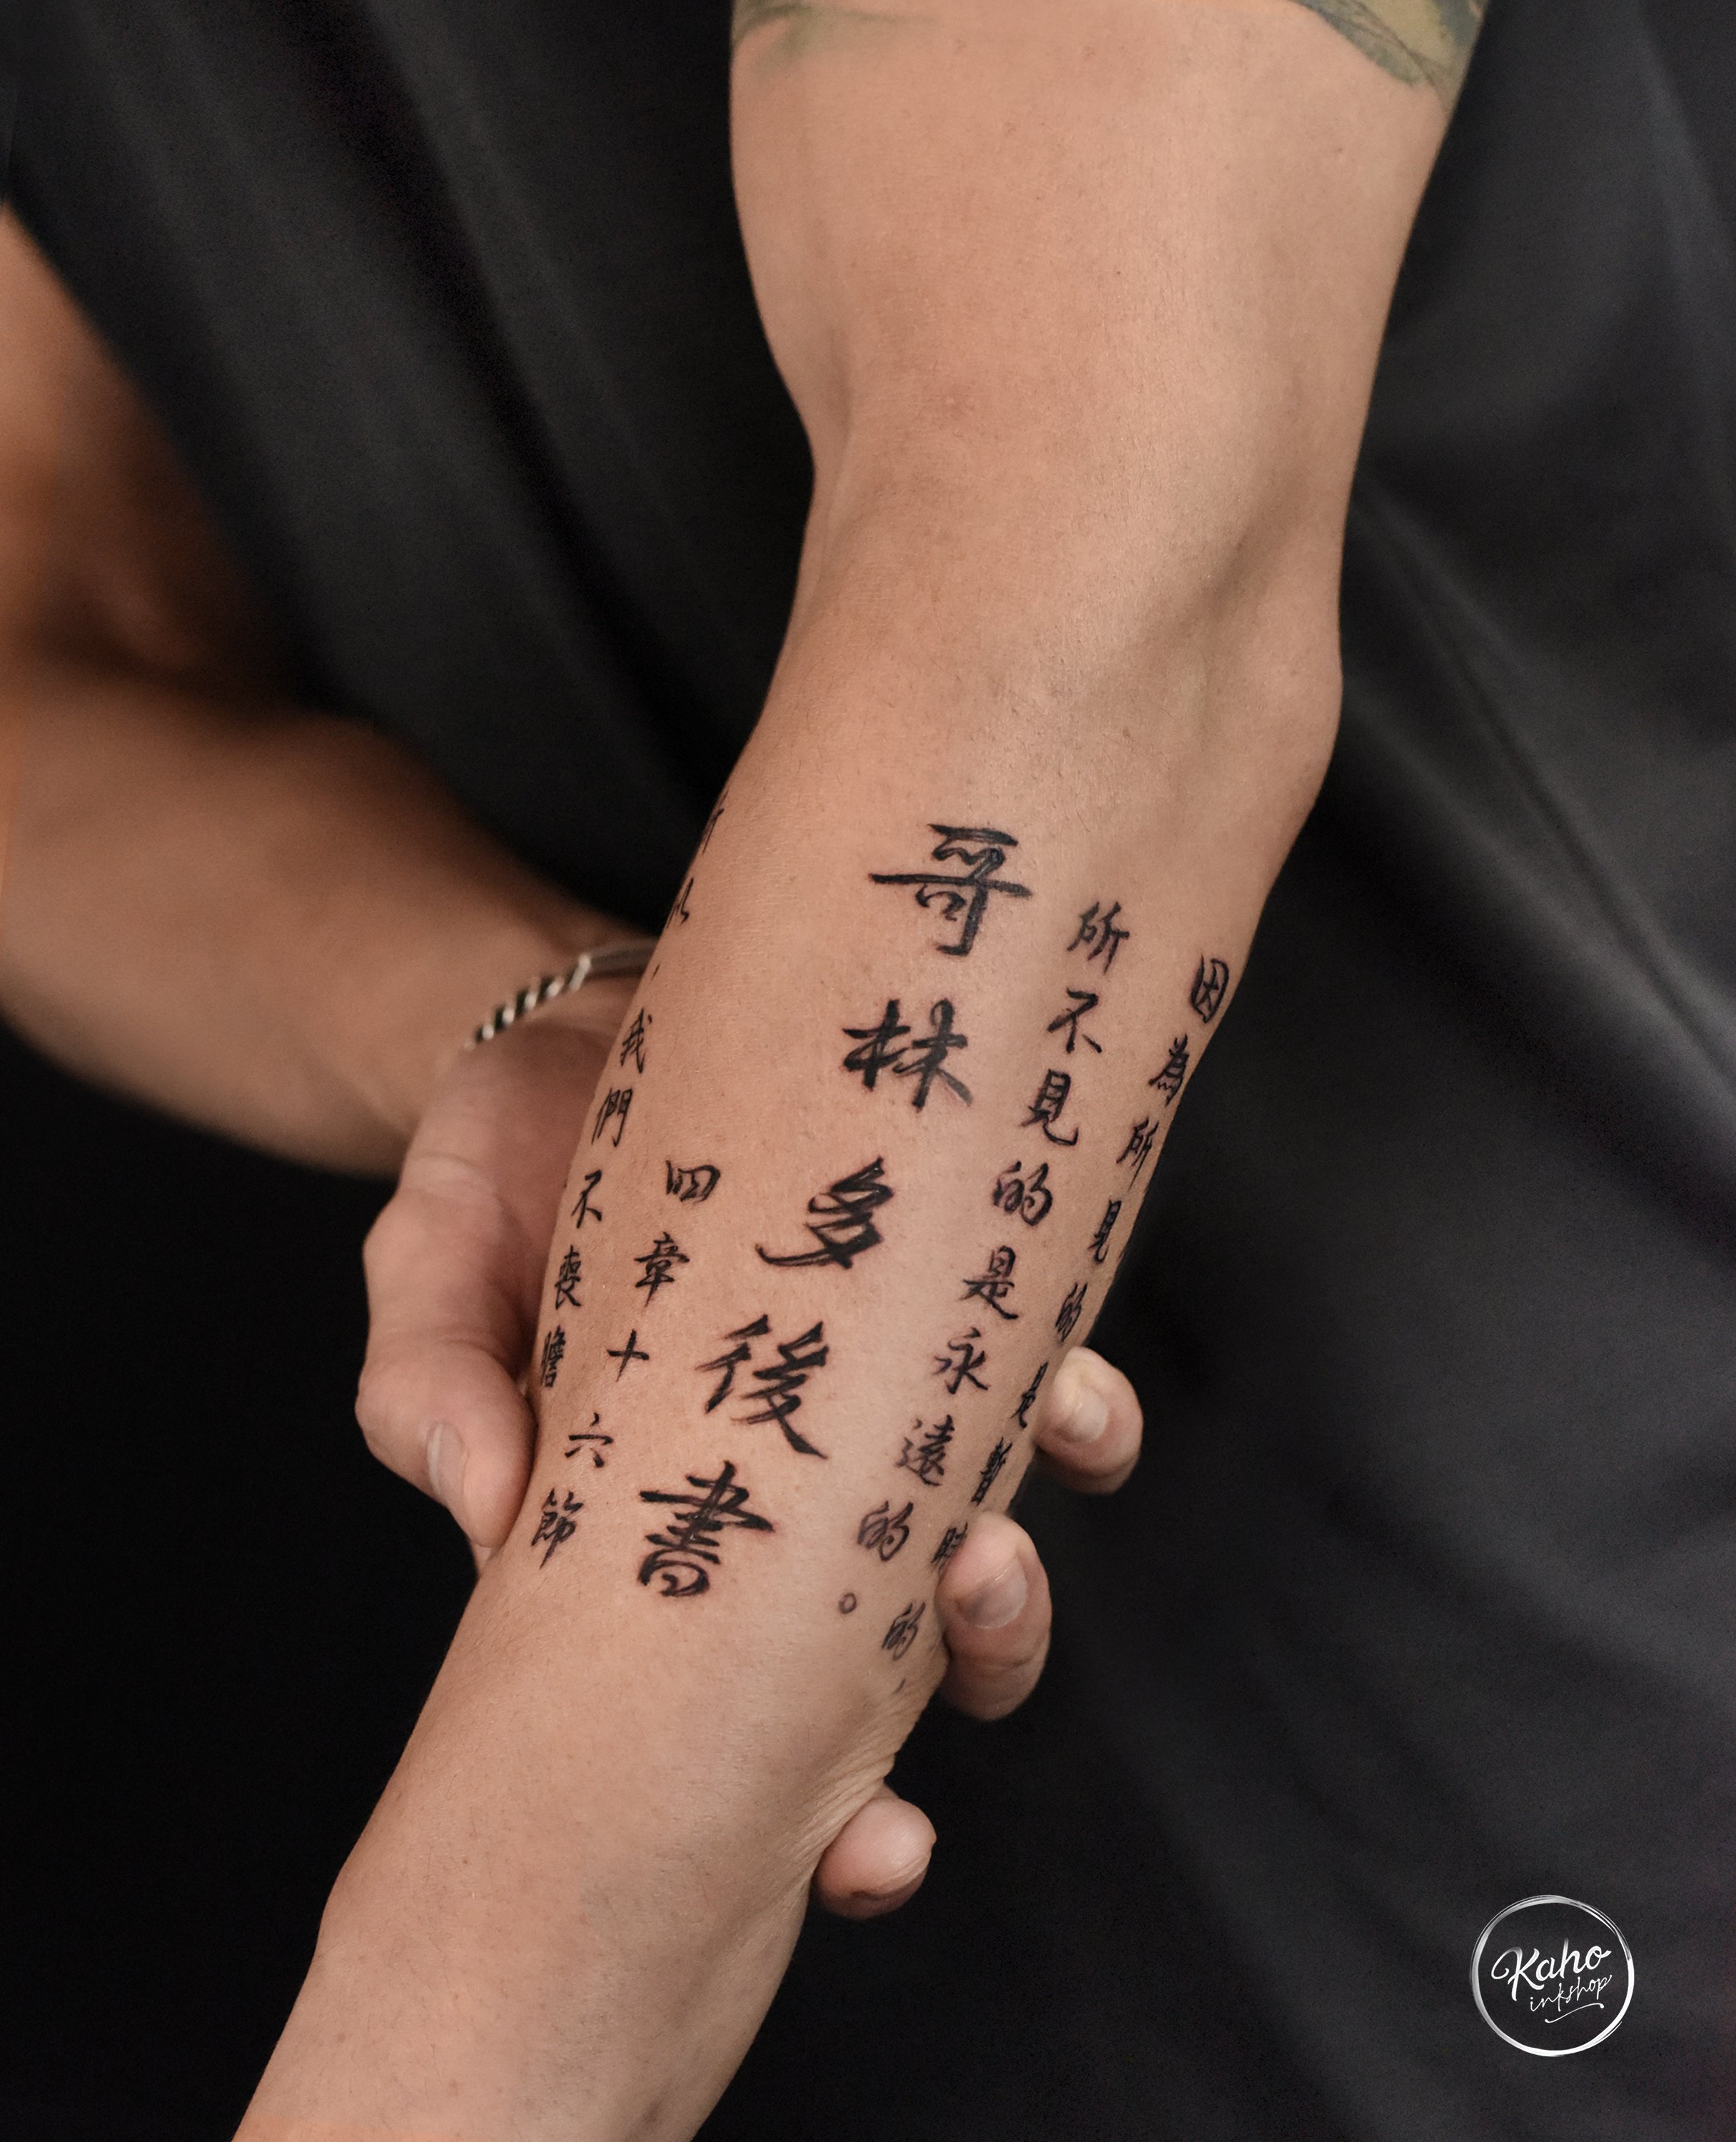 Permanent Number: Chinese Mother Tattoos Phone Number on Son's Arm, Strikes  through Old One | What's on Weibo